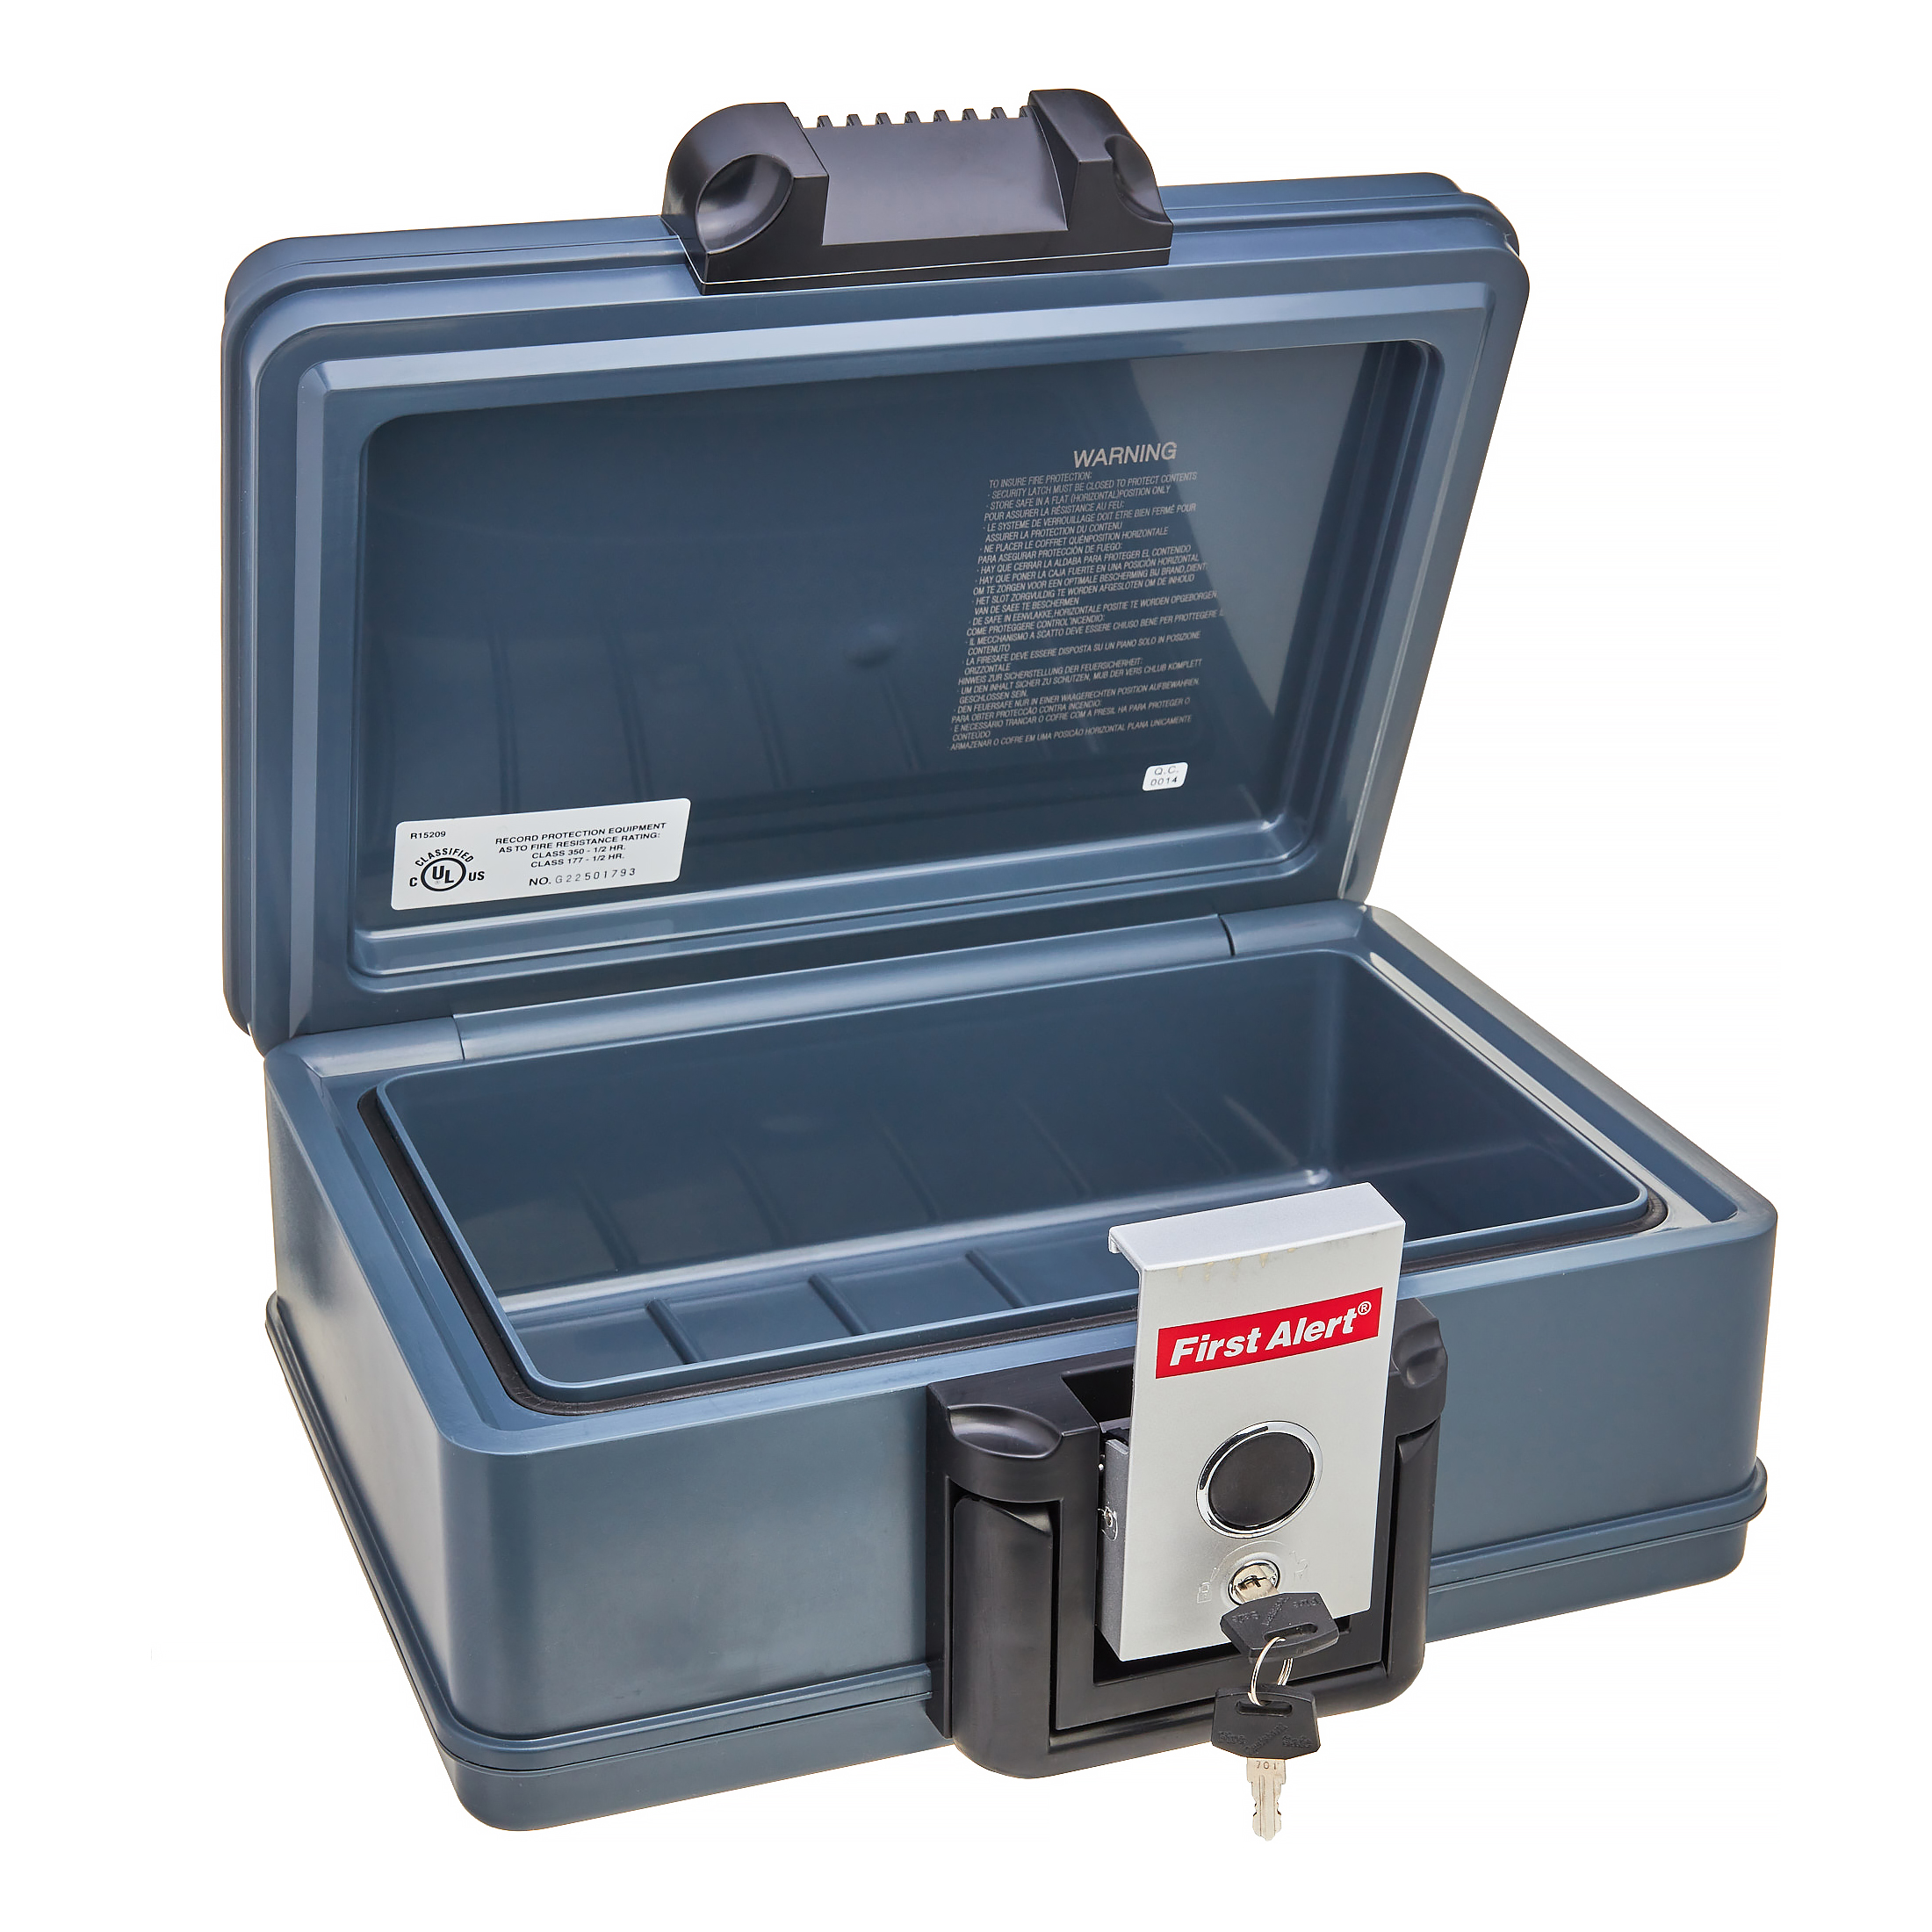 First Alert 2013F Water and Fire Protector File Chest, 0.17 Cubic Ft. - image 3 of 5